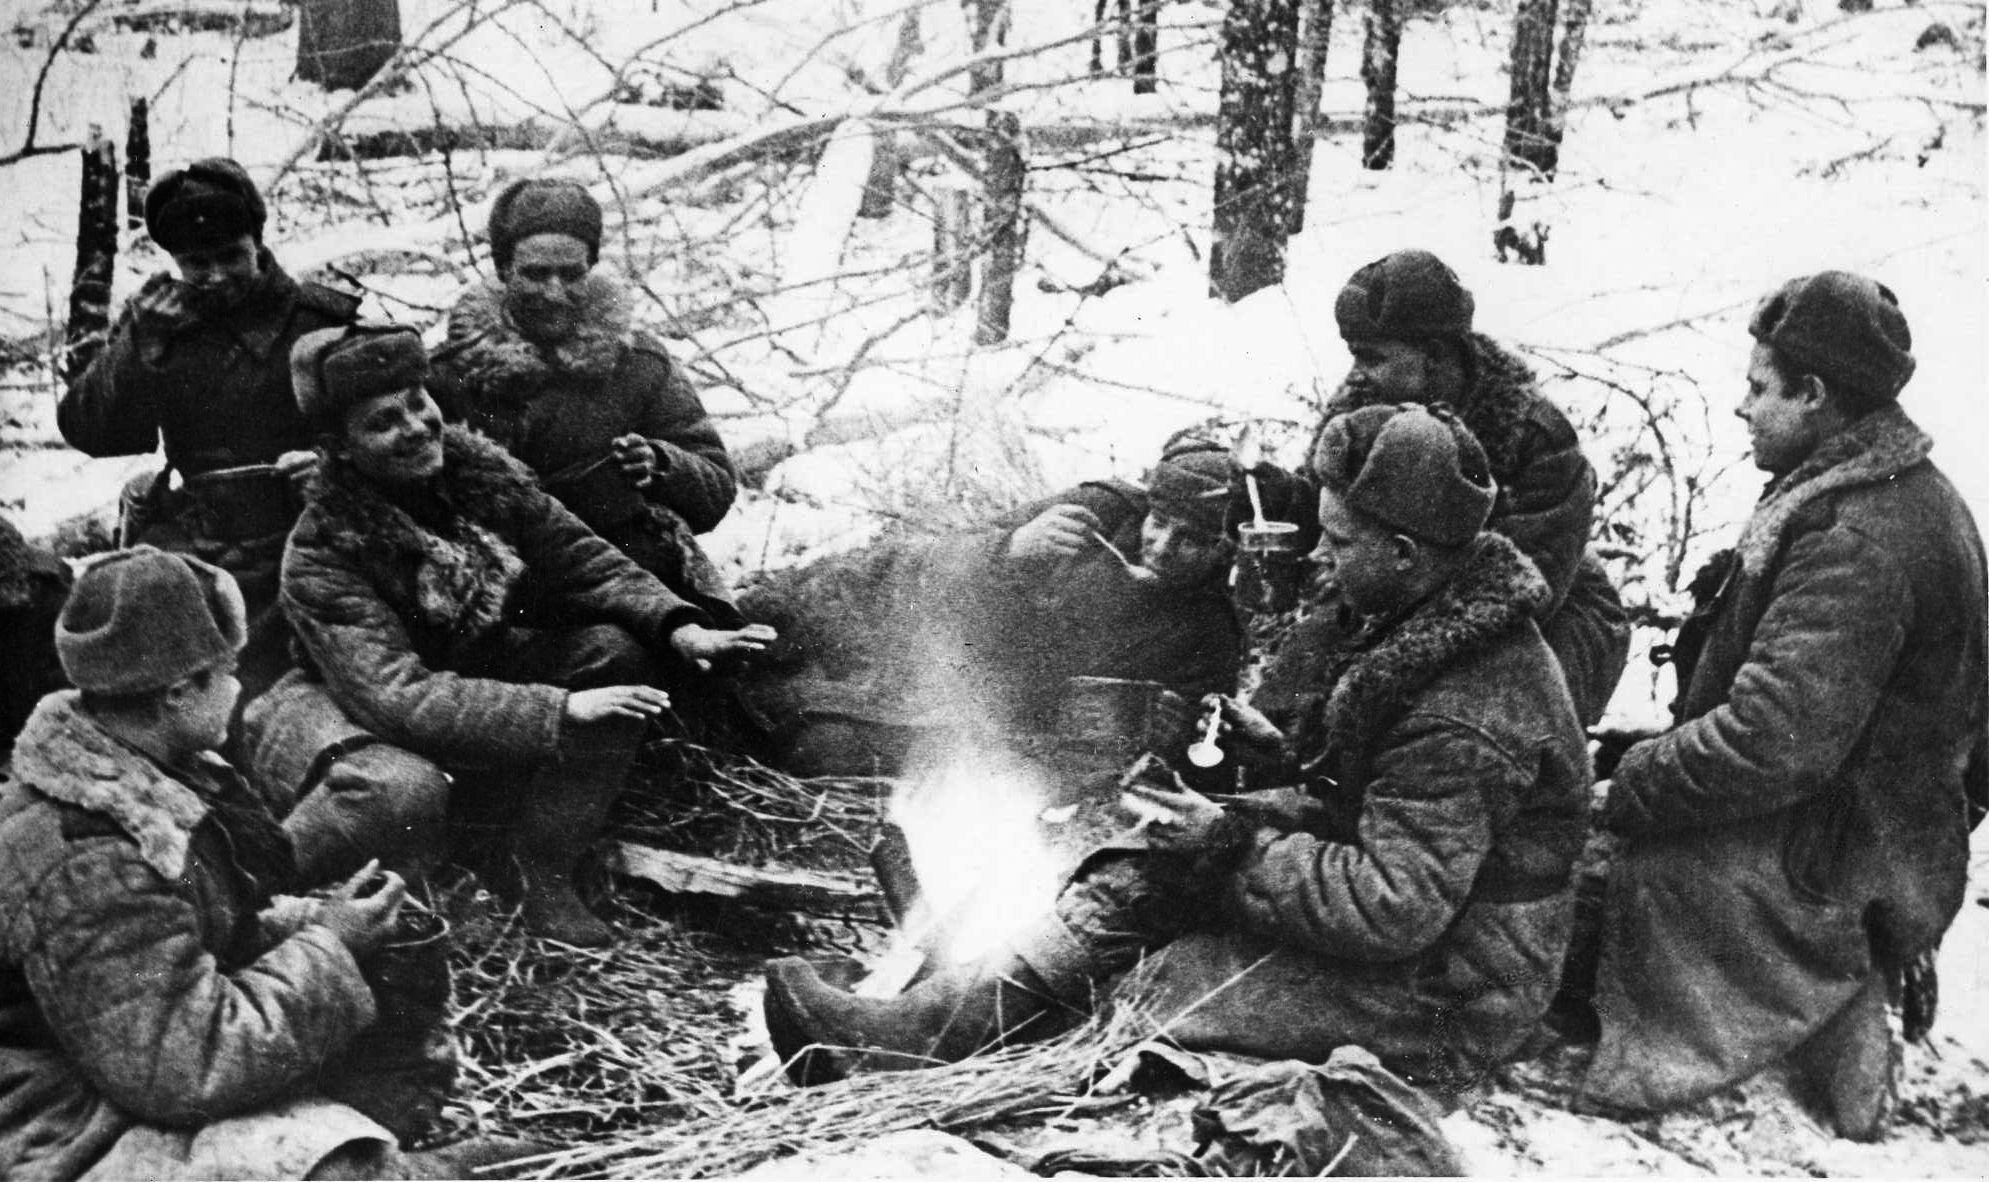  Uniformed against the cold, soldiers of the Red Army gather around a campfire during a lull in fighting on the Eastern Front. The Soviet effort to liberate the Don Basin, Operation Gallop, proved overly ambitious.